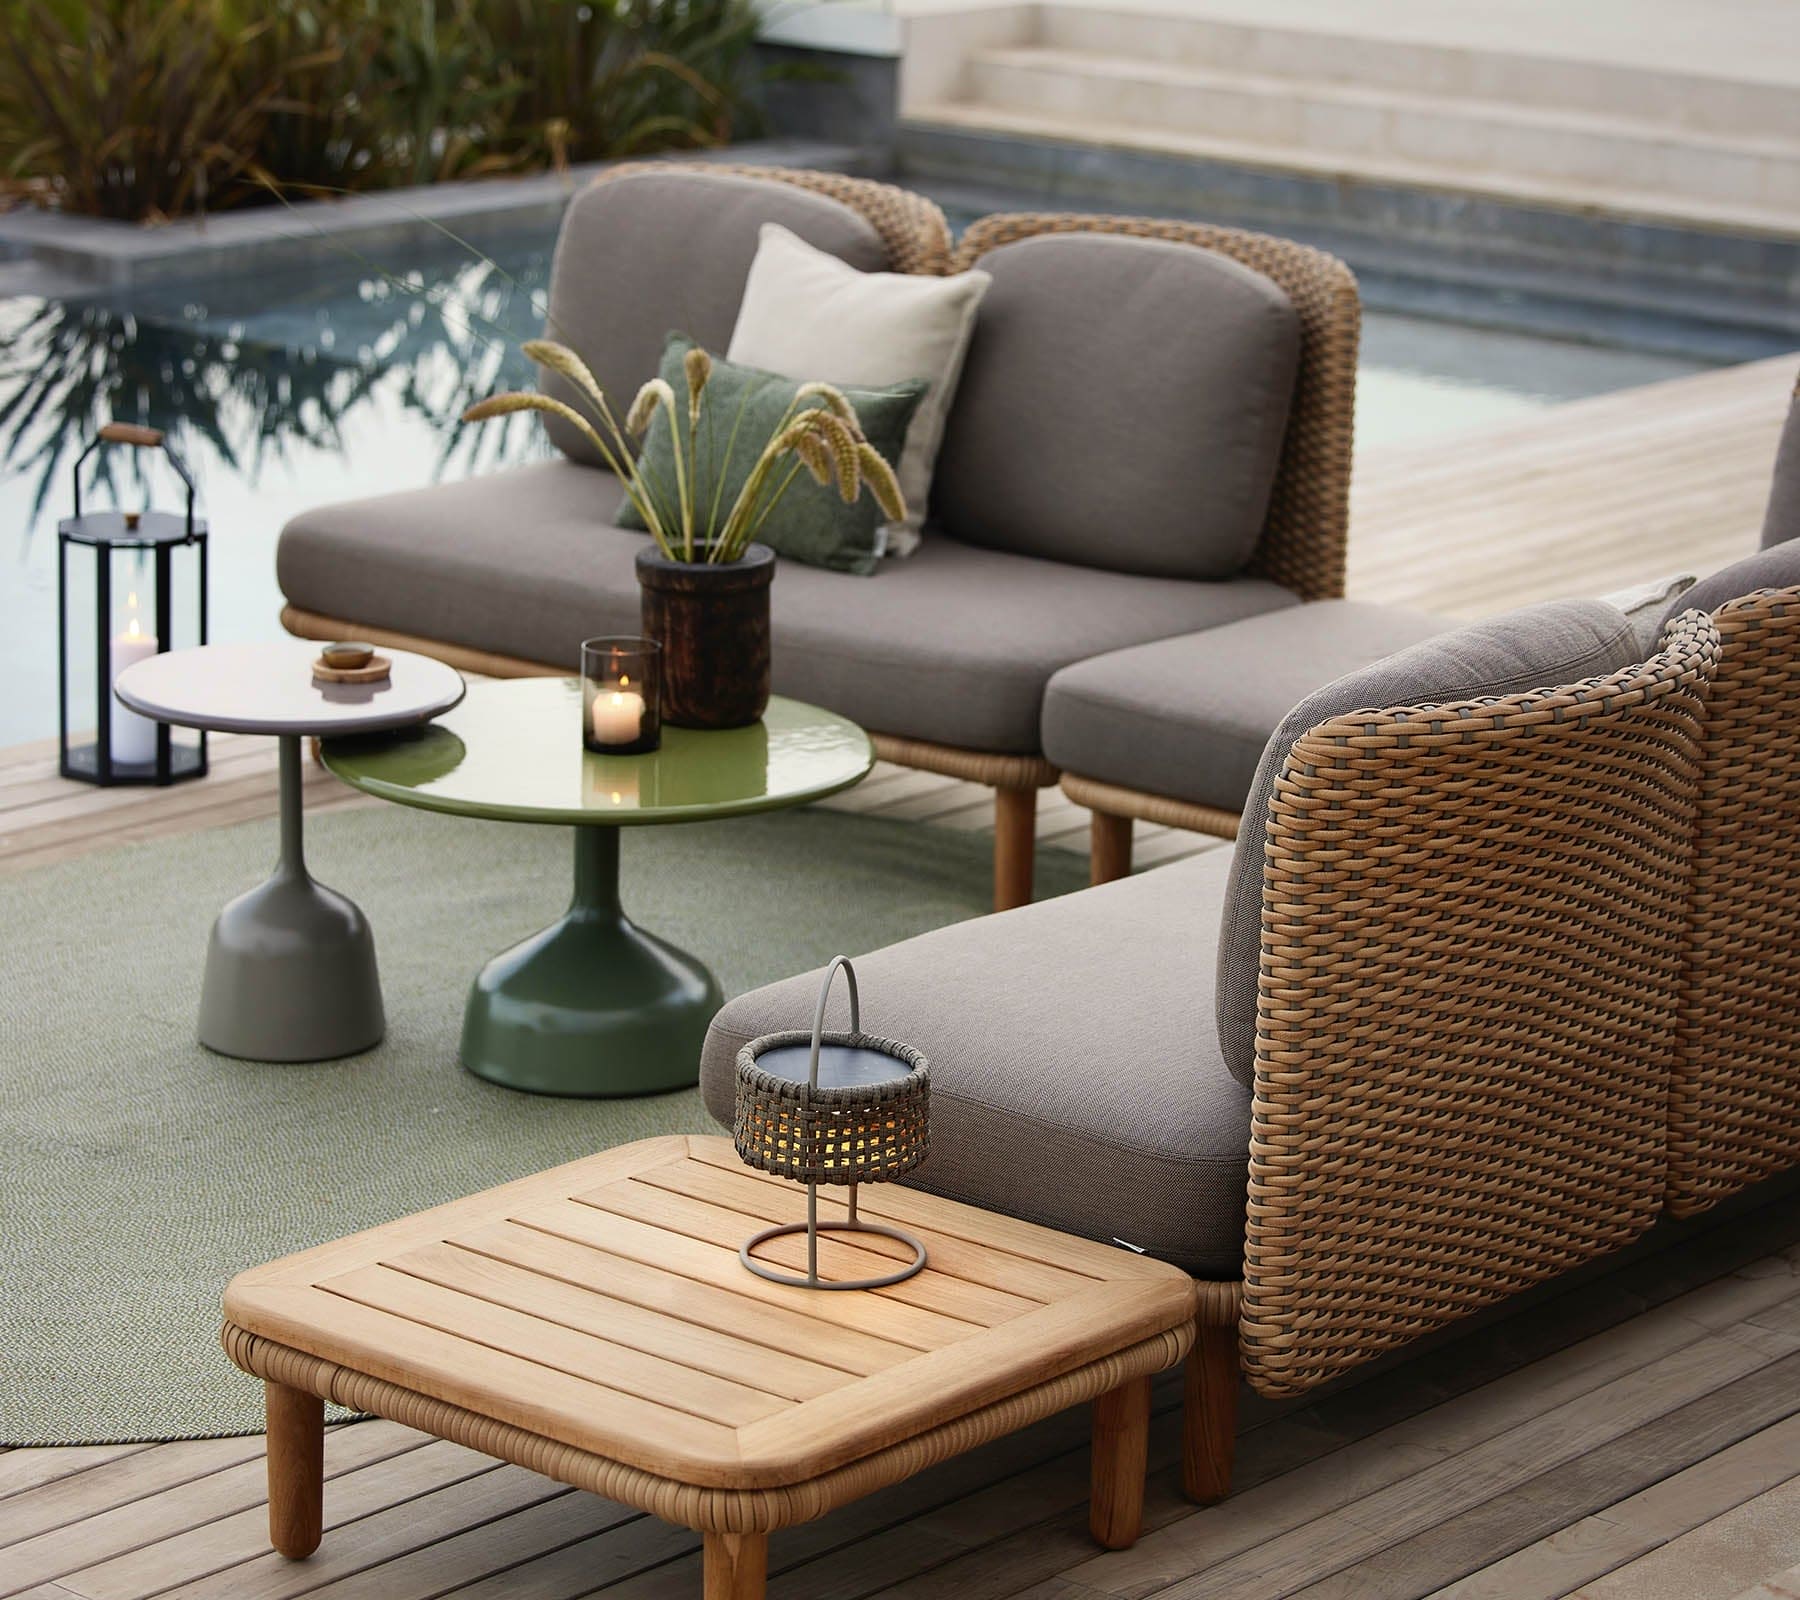 Boxhill's Glaze Outdoor Round Coffee Table lifestyle image with module sofa and teak table, beside the pool